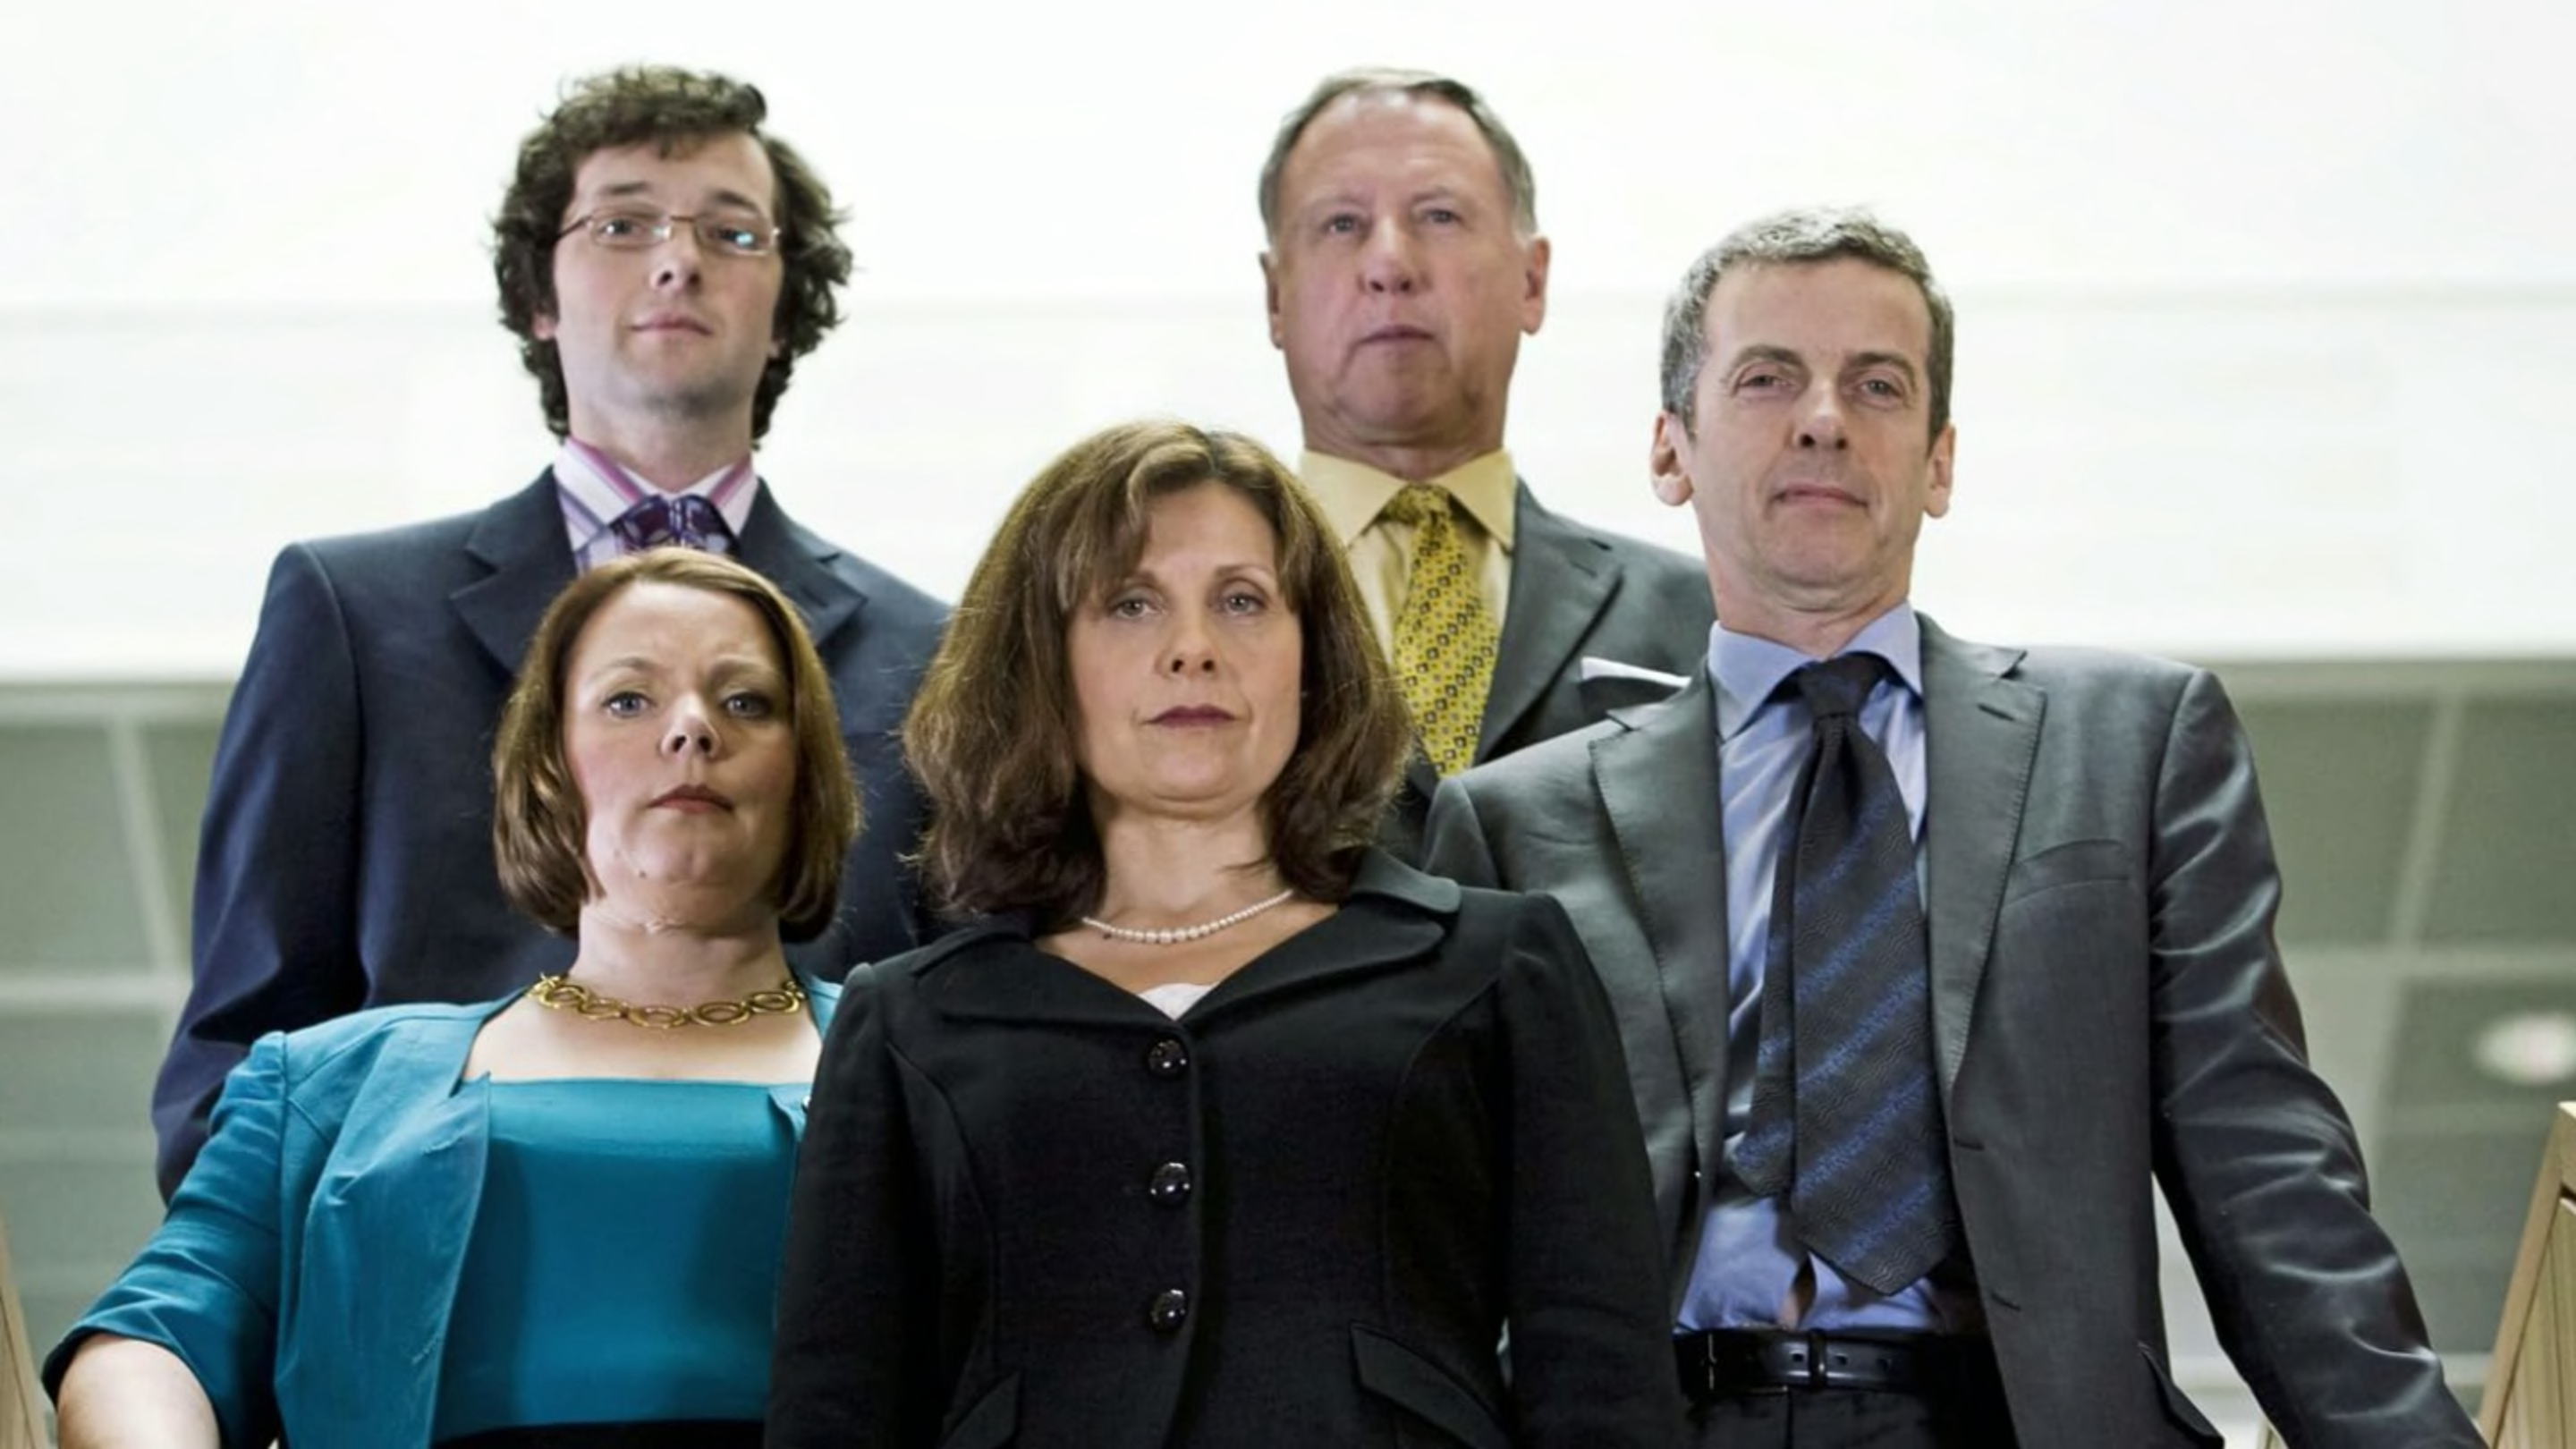 15 Surprising Facts About ‘The Thick of It’